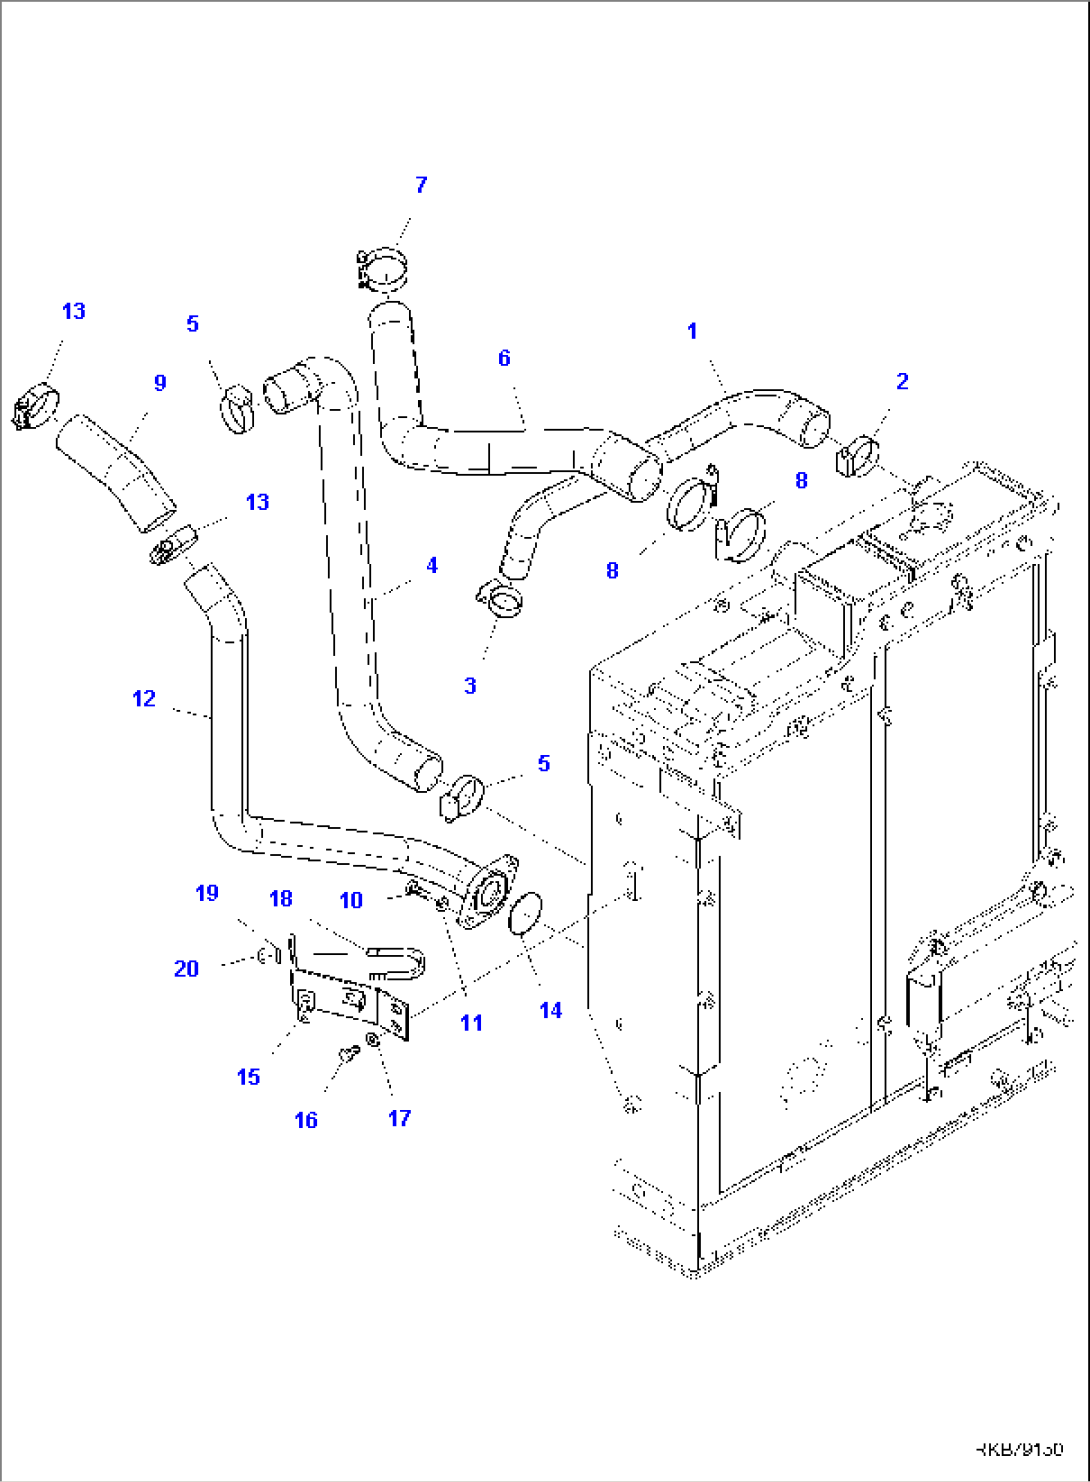 COOLING SYSTEM, CIRCUIT